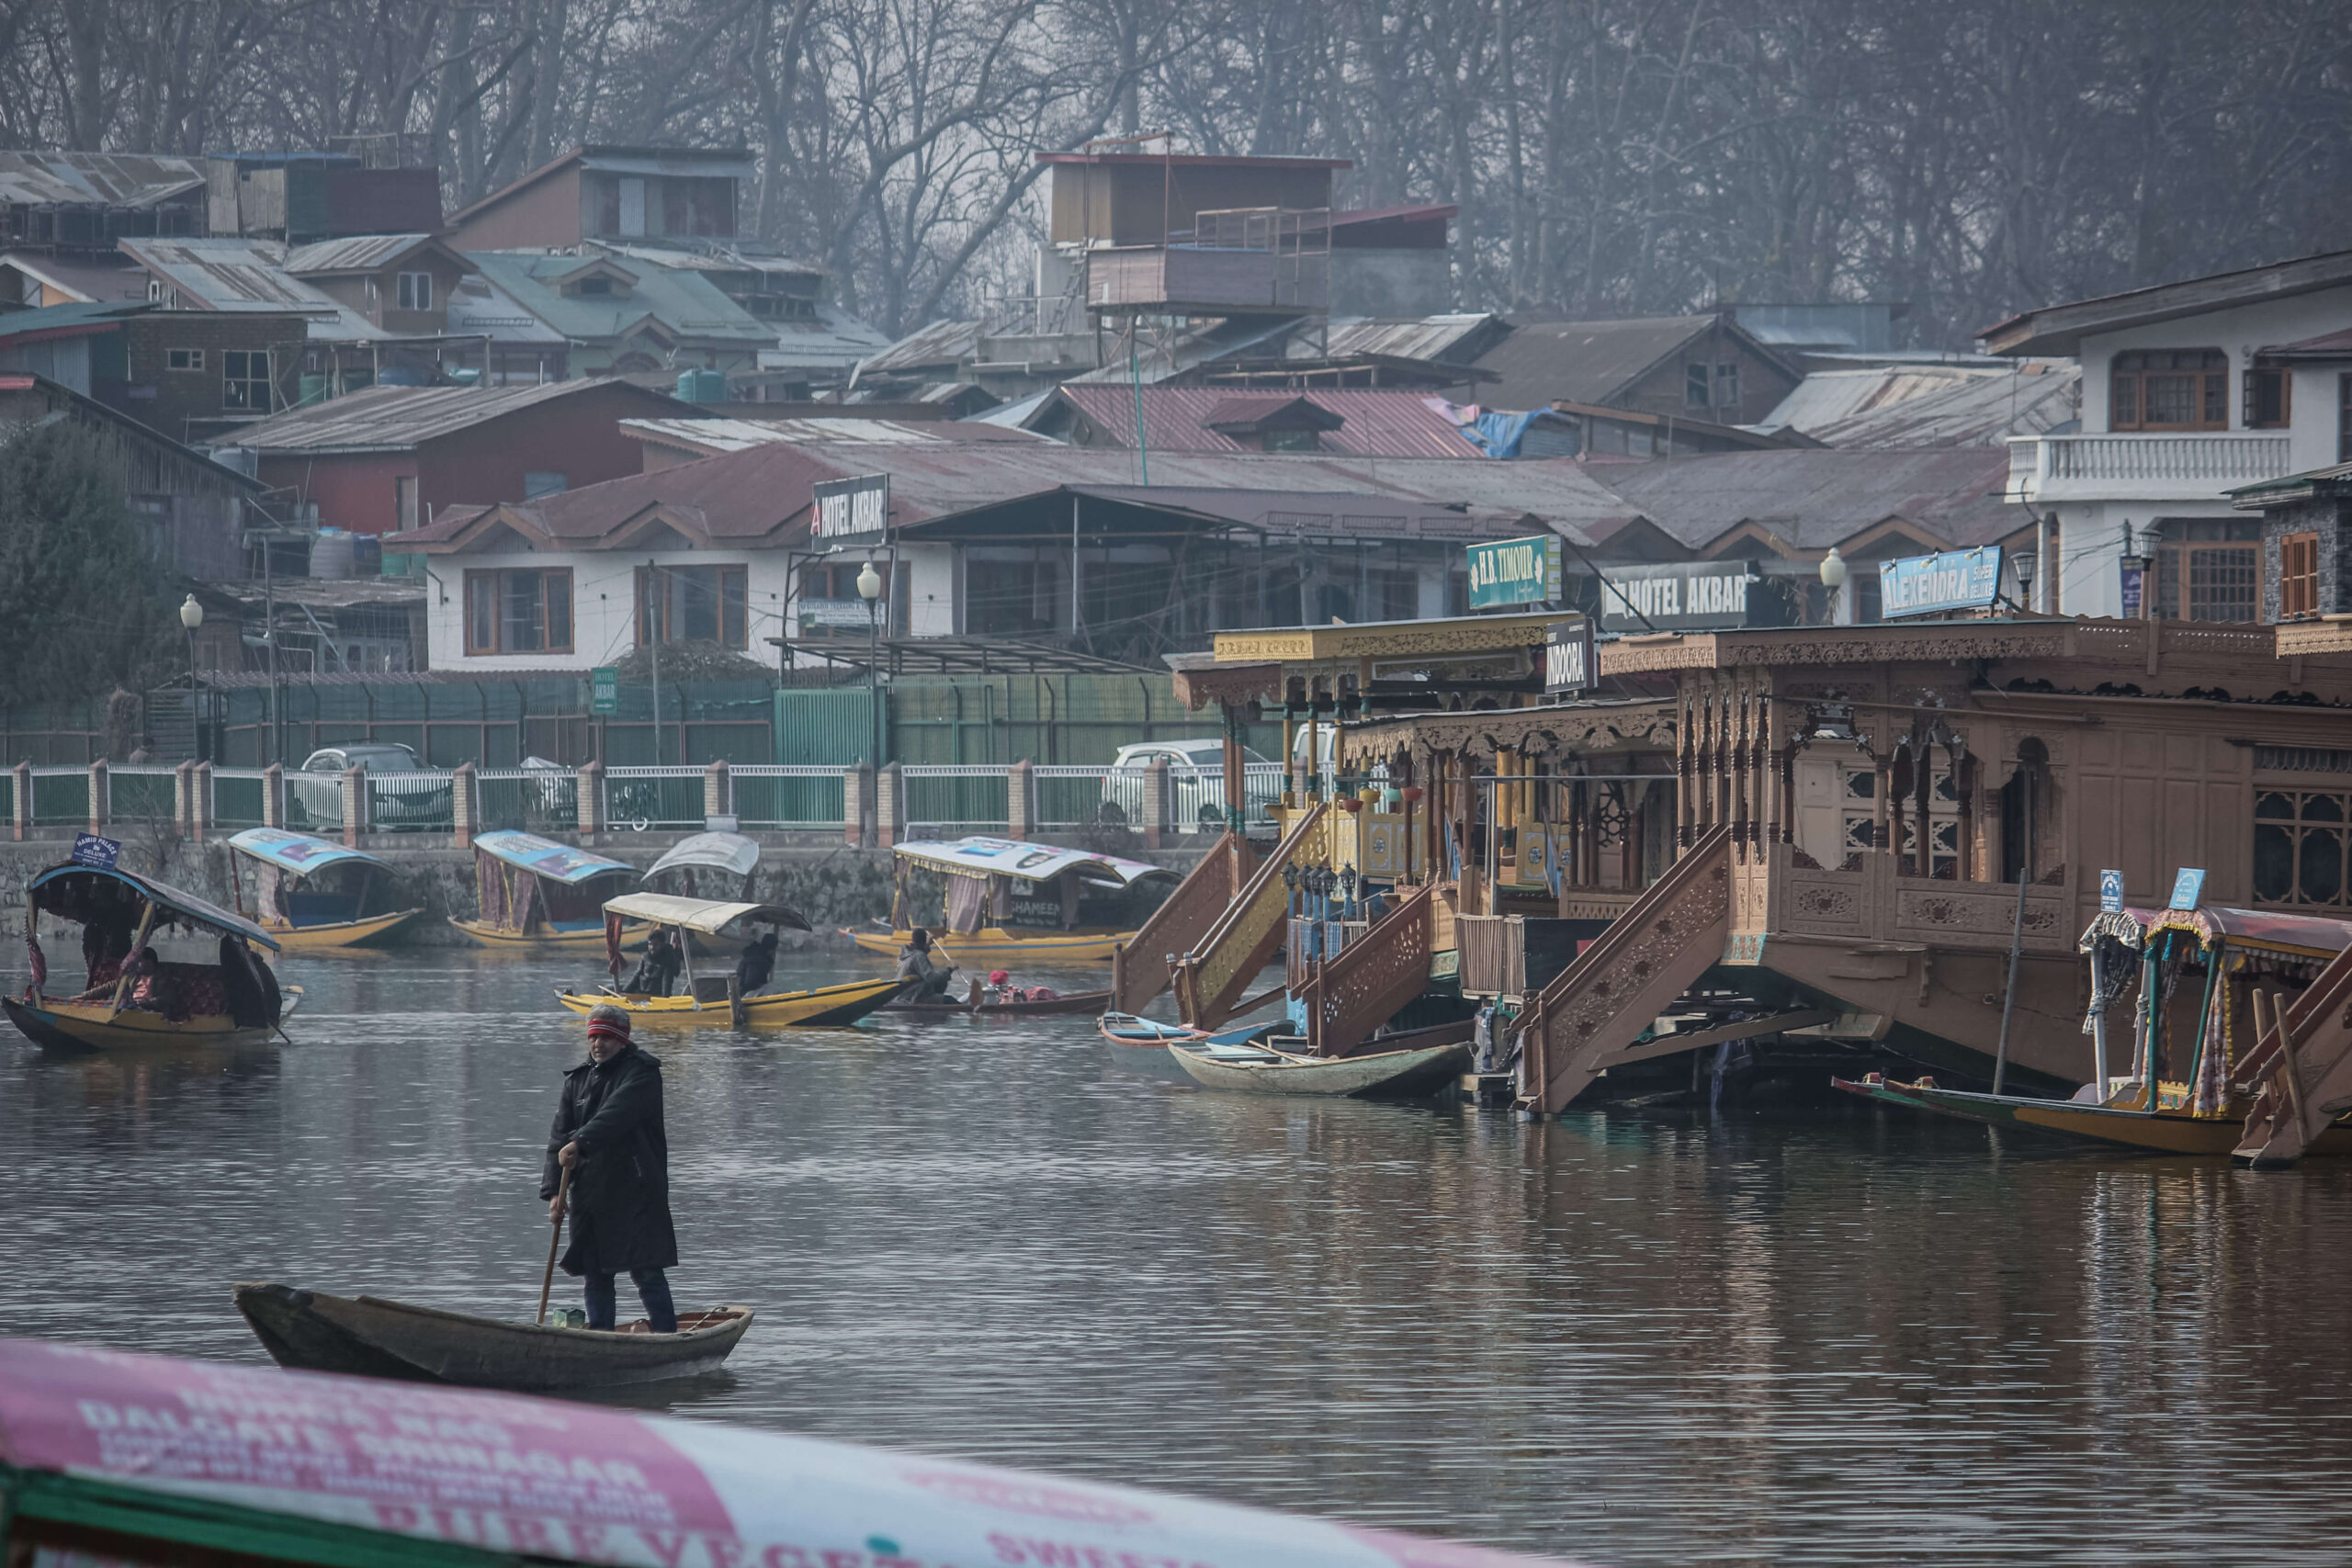 The overlooked houseboats of Kashmir pose a threat to the region’s culture and economy